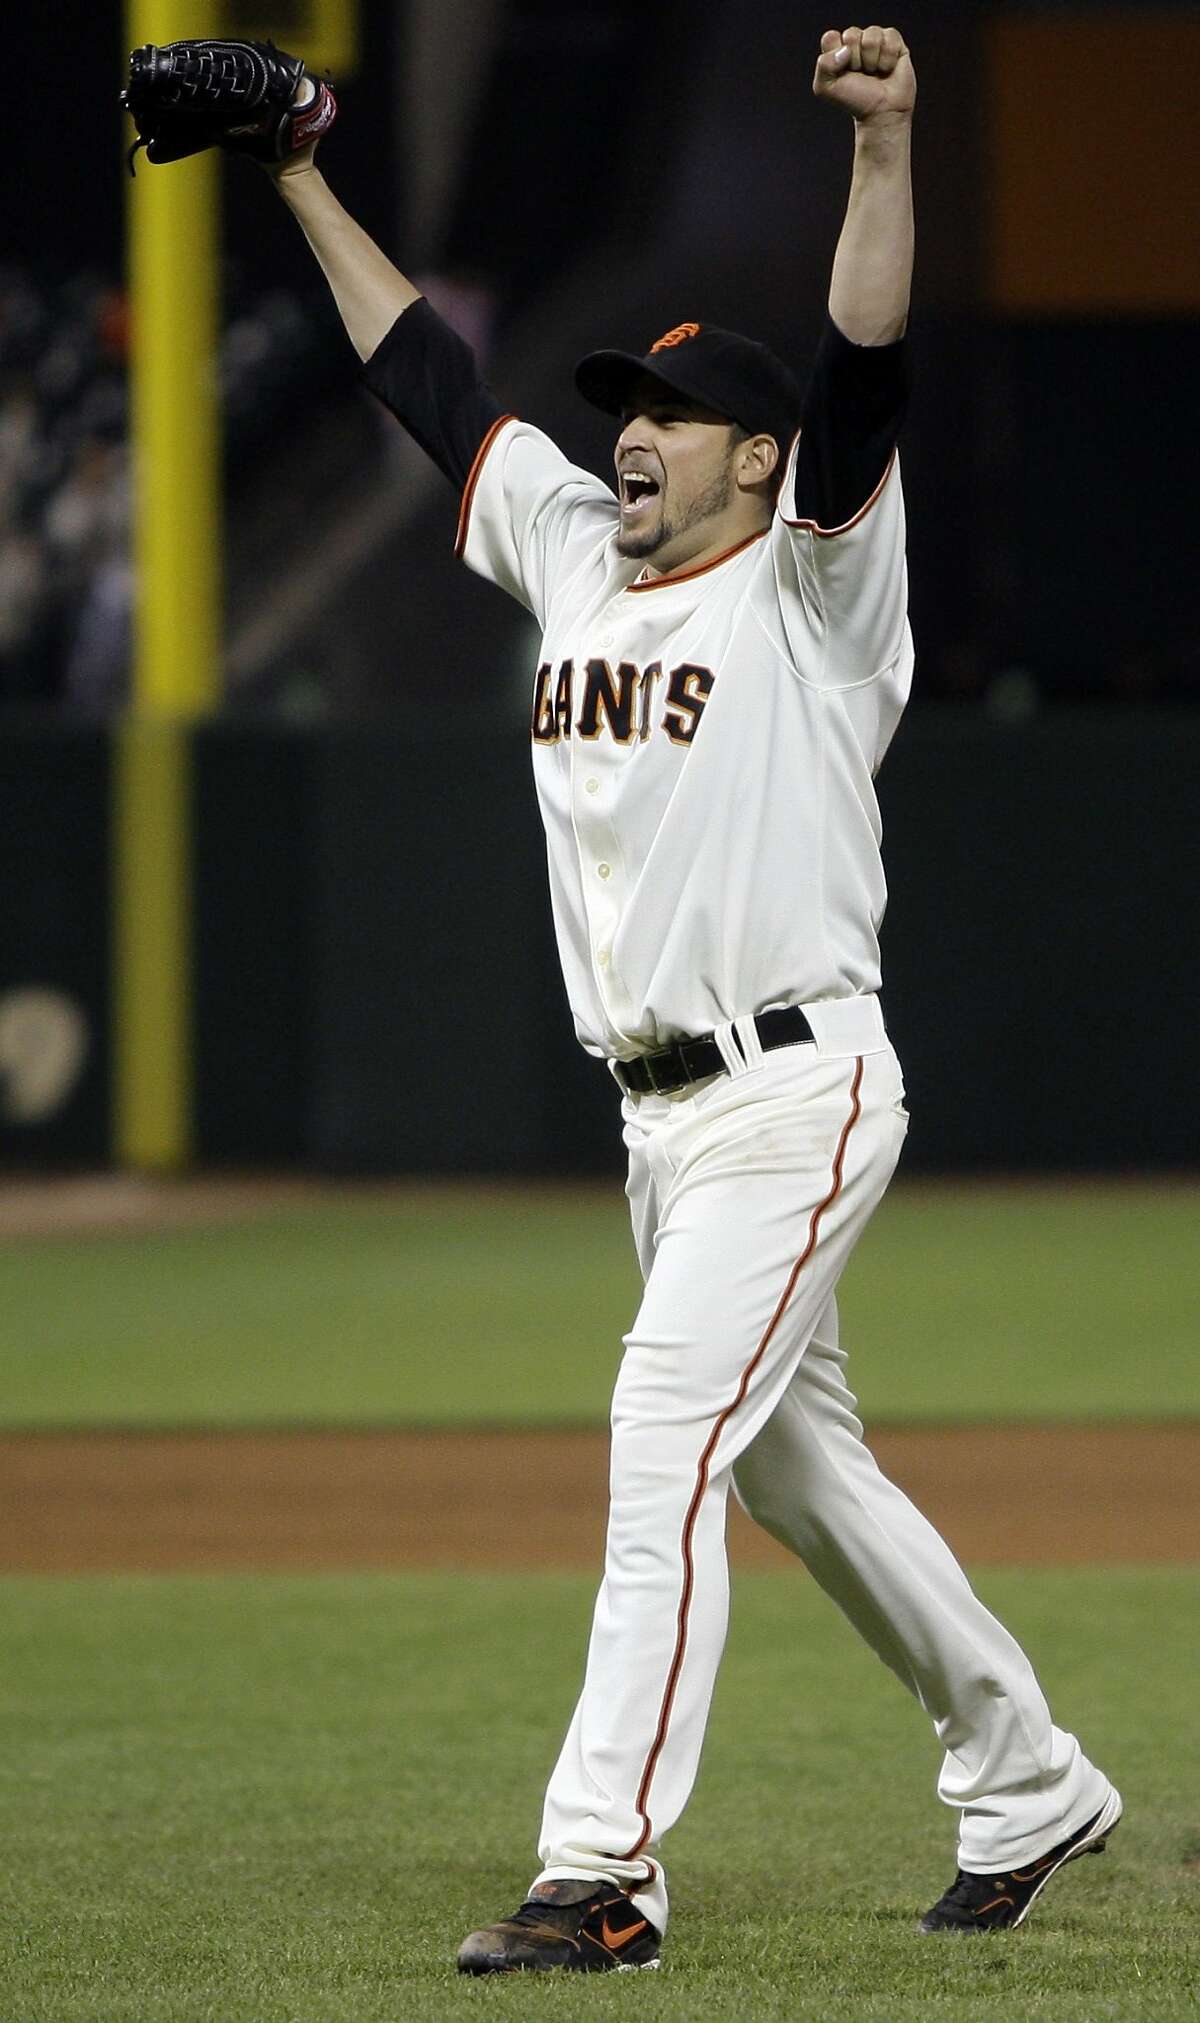 San Francisco Giants' Jonathan Sanchez celebrates at the end of a baseball game after pitching a no-hitter against the San Diego Padres Friday, July 10, 2009, in San Francisco. Sanchez pitched the majors' first no-hitter this season Friday night, dominating the San Diego Padres with an array of pitches in the San Francisco Giants' 8-0 victory. Sanchez finished with 11 strikeouts and no walks. (AP Photo/Ben Margot)